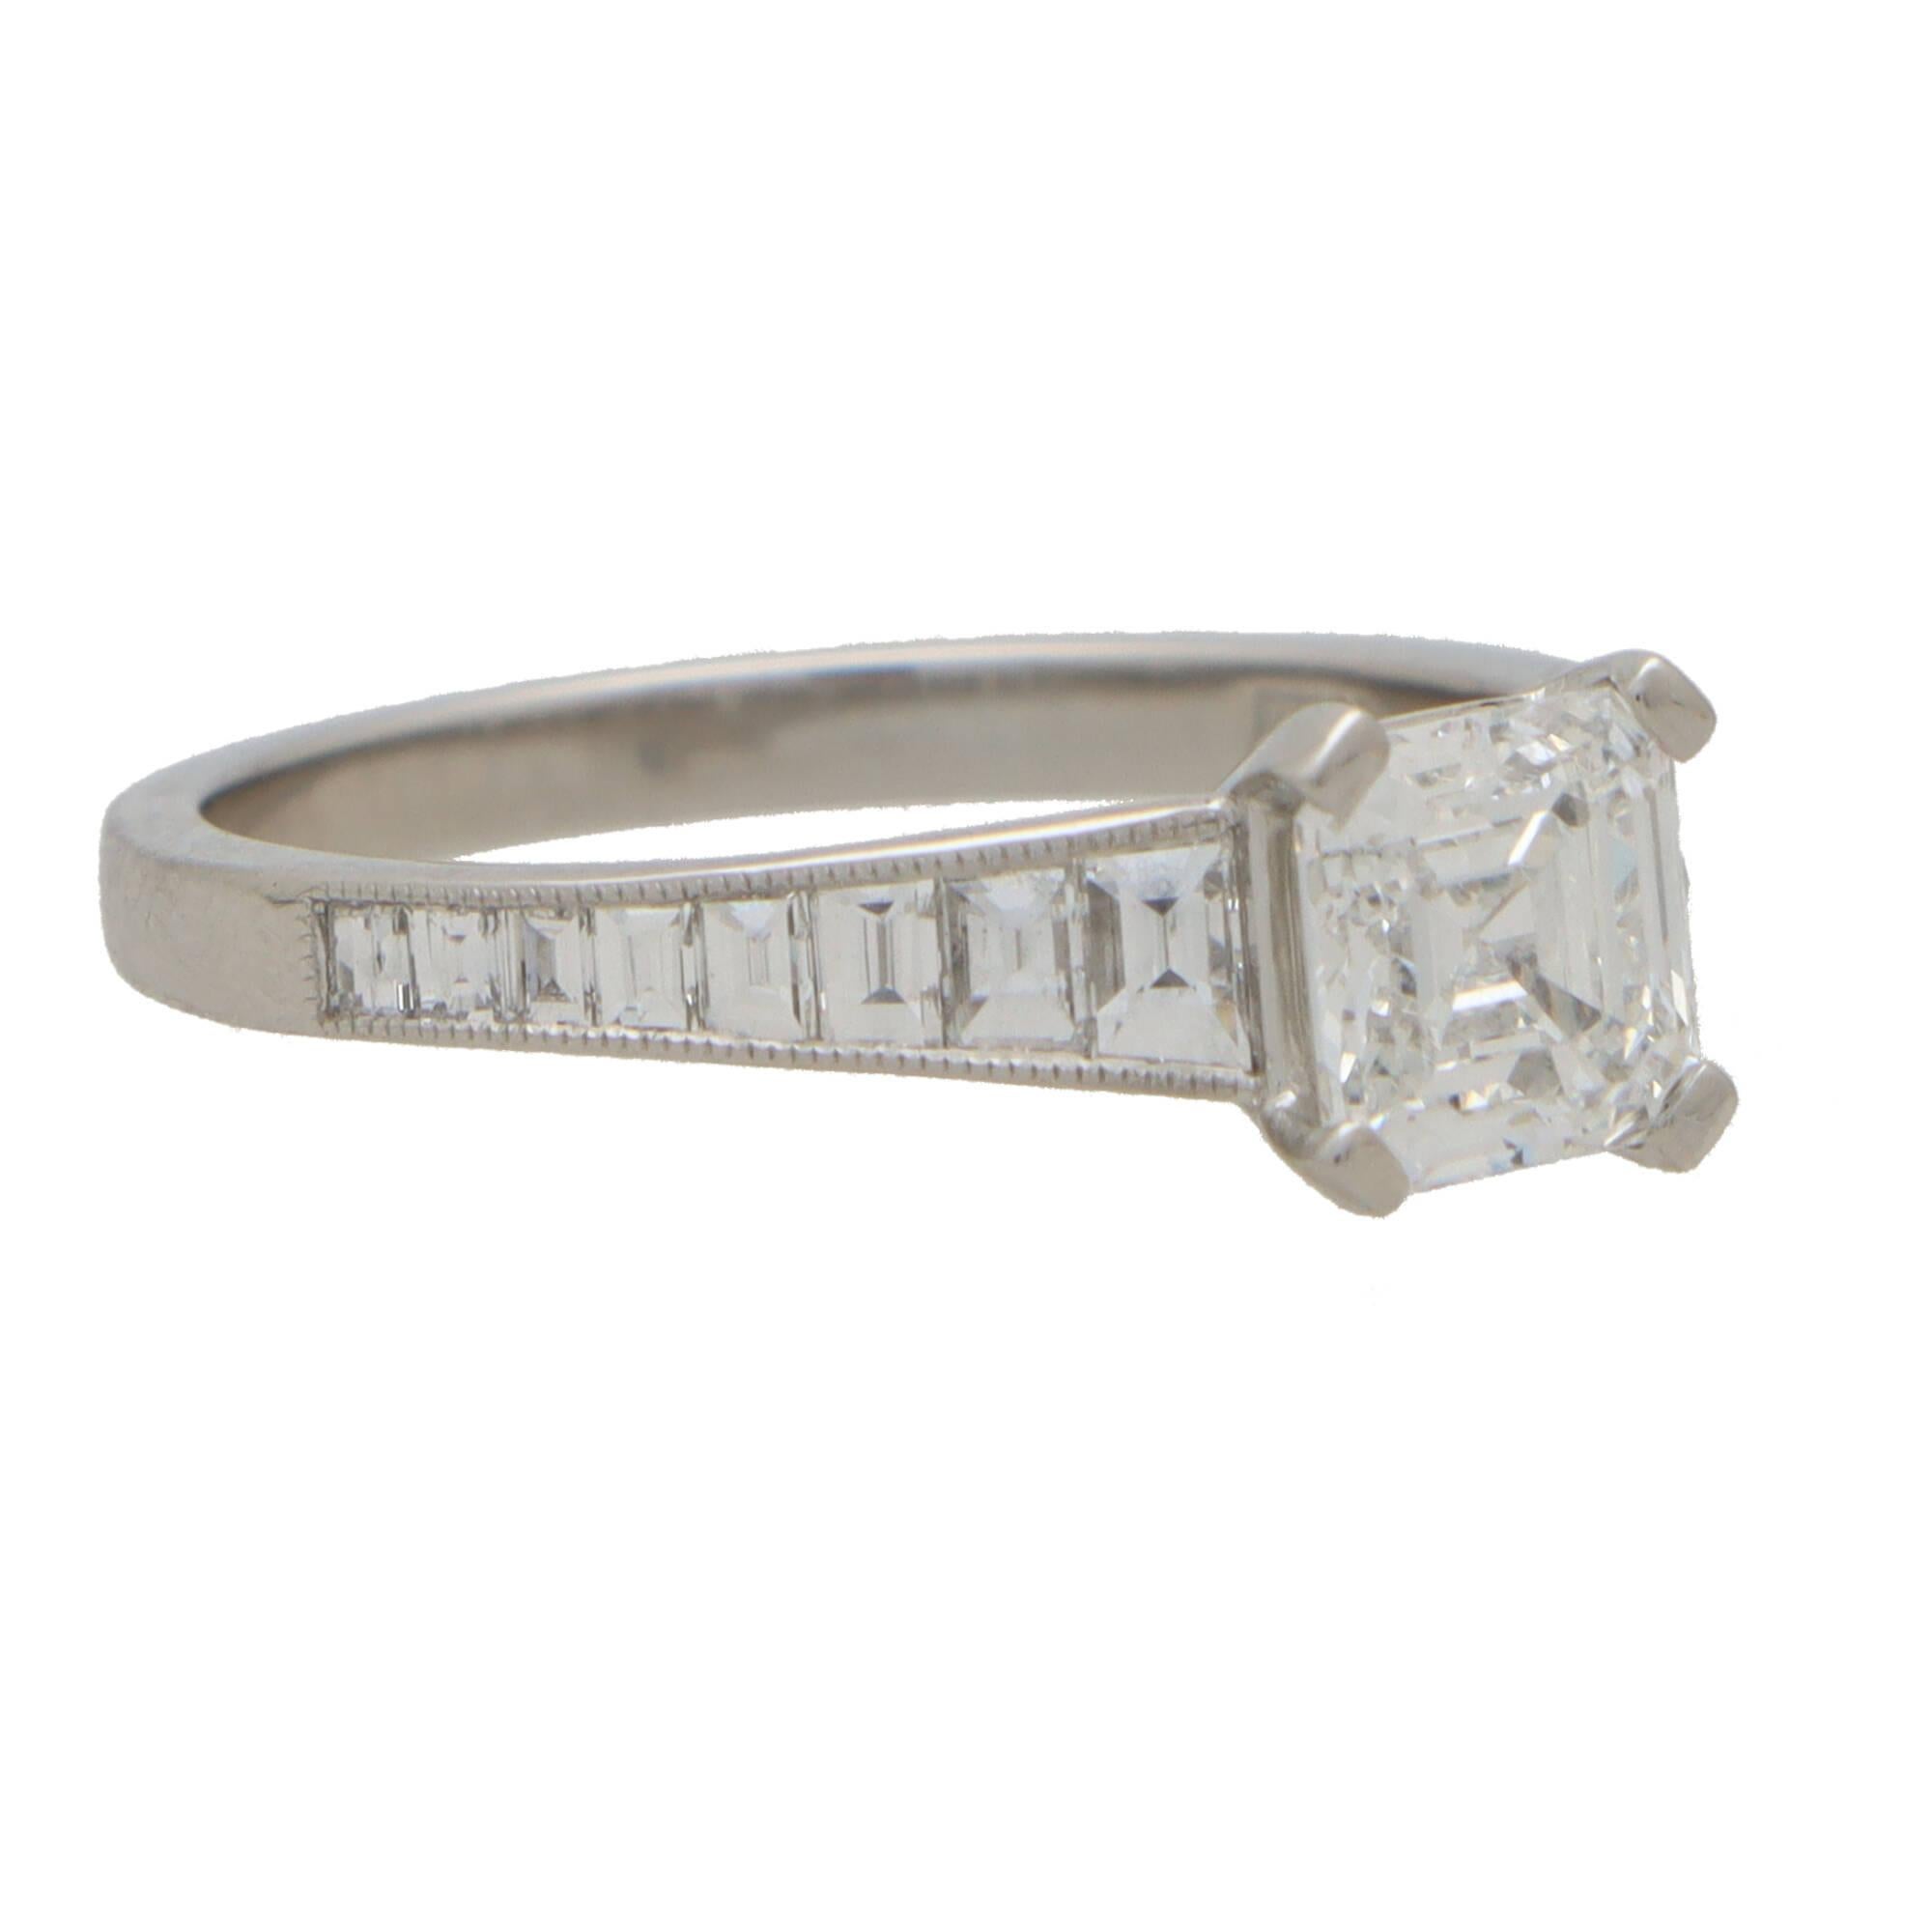  A beautiful Art Deco inspired Asscher cut diamond ring set in platinum. 

This sparkly piece is centrally set with an extremely elegant independently GIA certified Asscher cut diamond. The diamond is securely four claw set to centre and is sided by